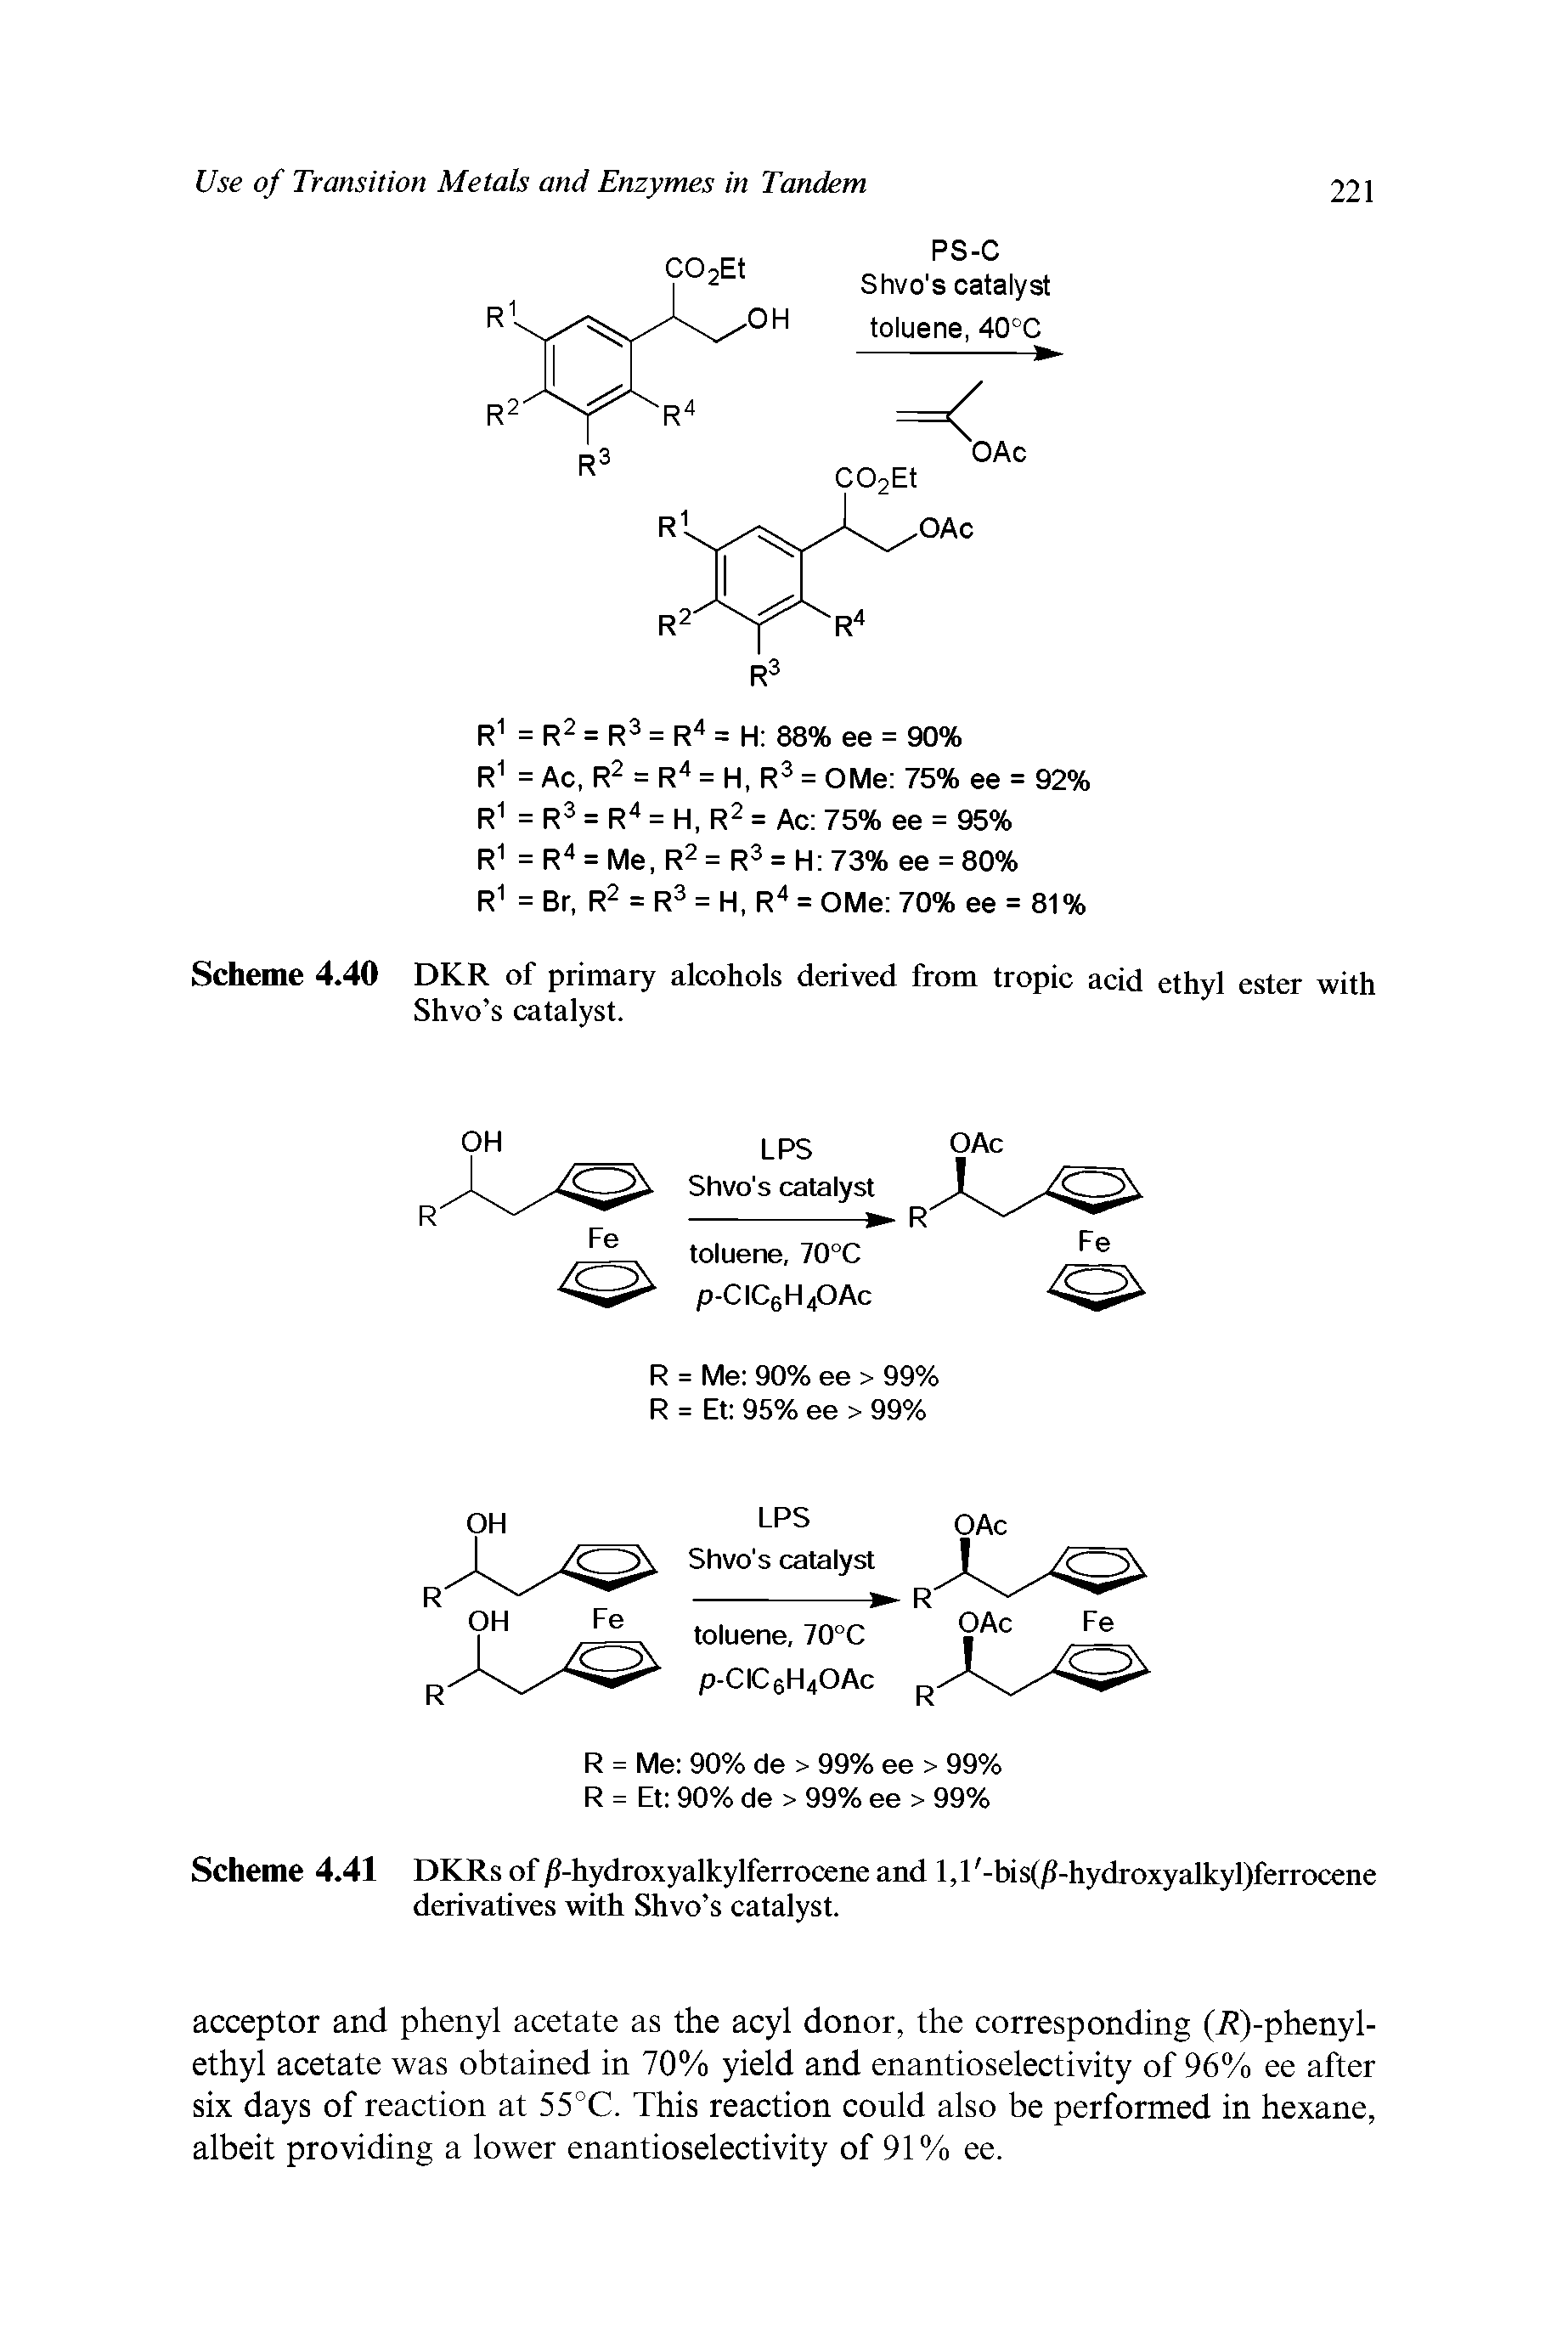 Scheme 4.40 DKR of primary alcohols derived from tropic acid ethyl ester with Shvo s catalyst.